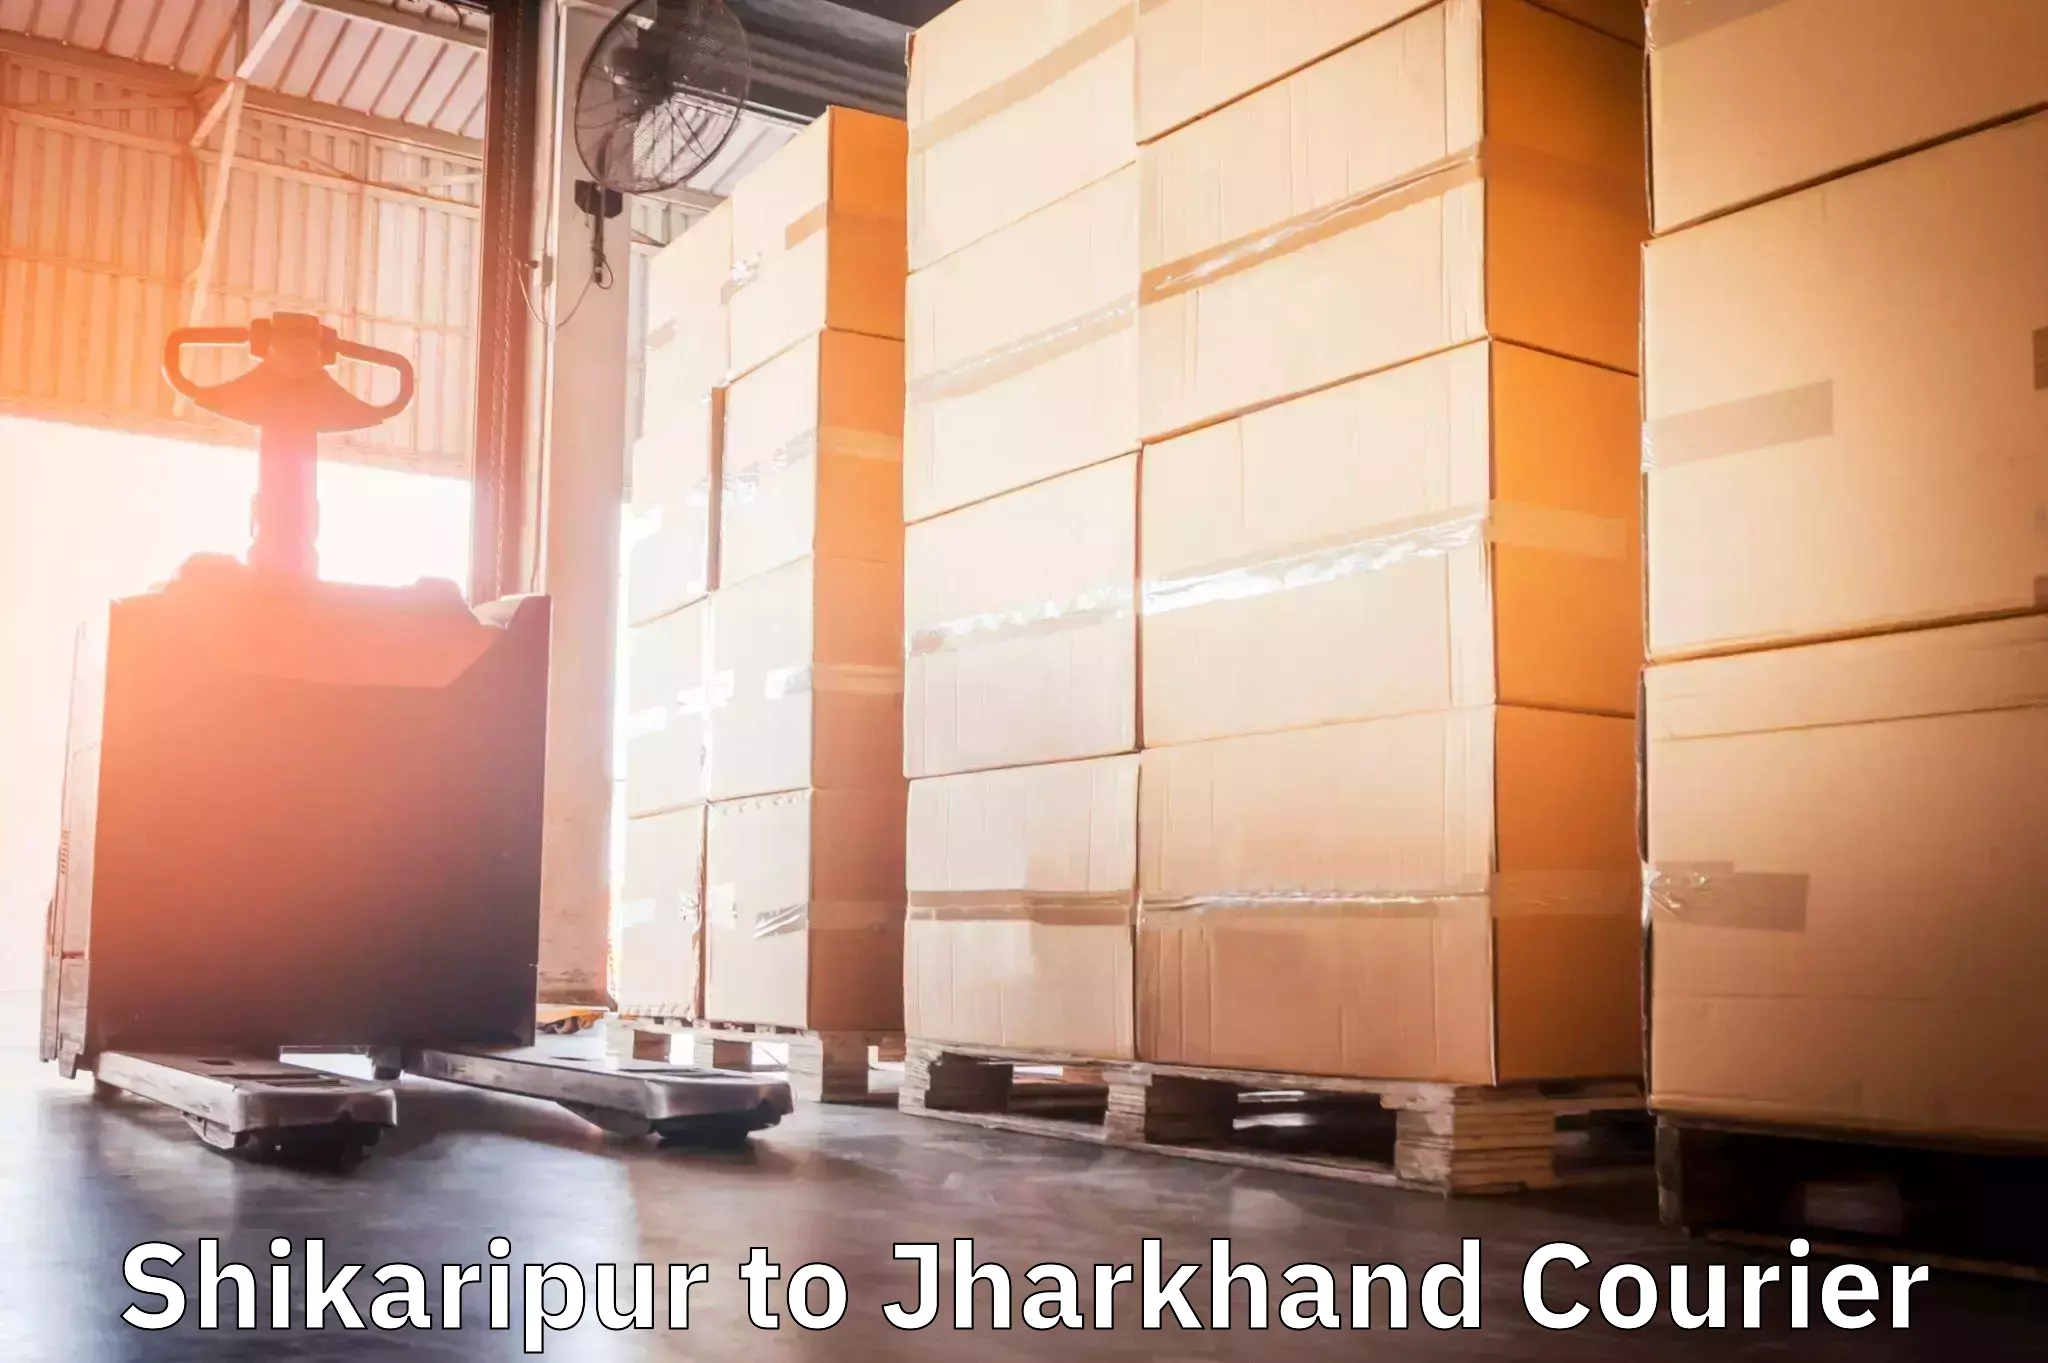 Express delivery capabilities Shikaripur to Boarijore